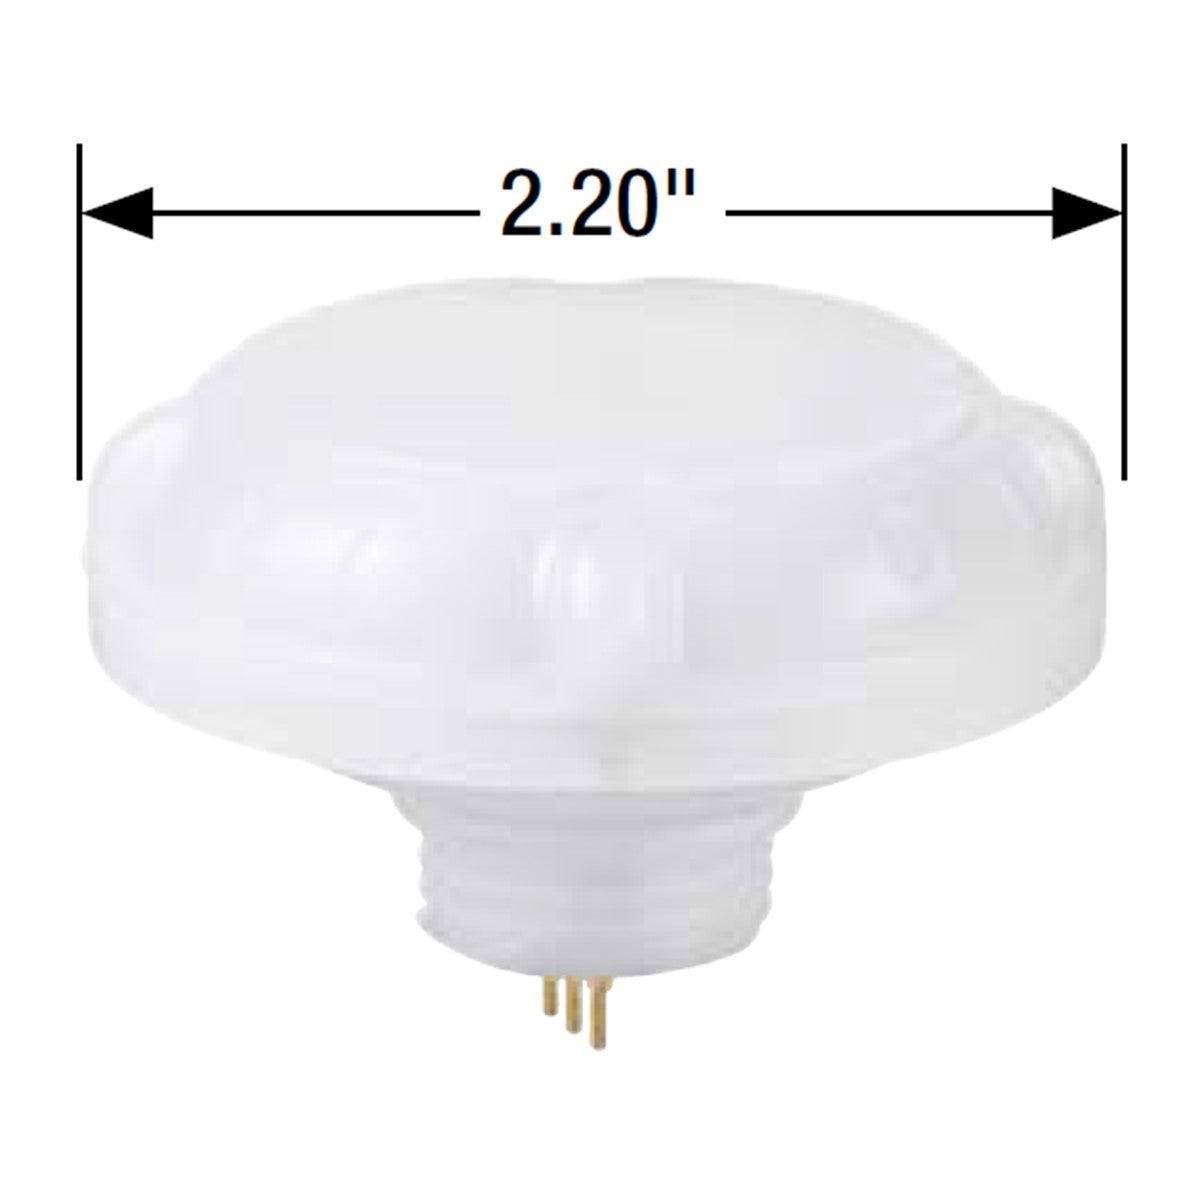 Sylvania High Bay PIR DC Motion/Daylight Sensor, Remote Required To Change Default Settings - Bees Lighting